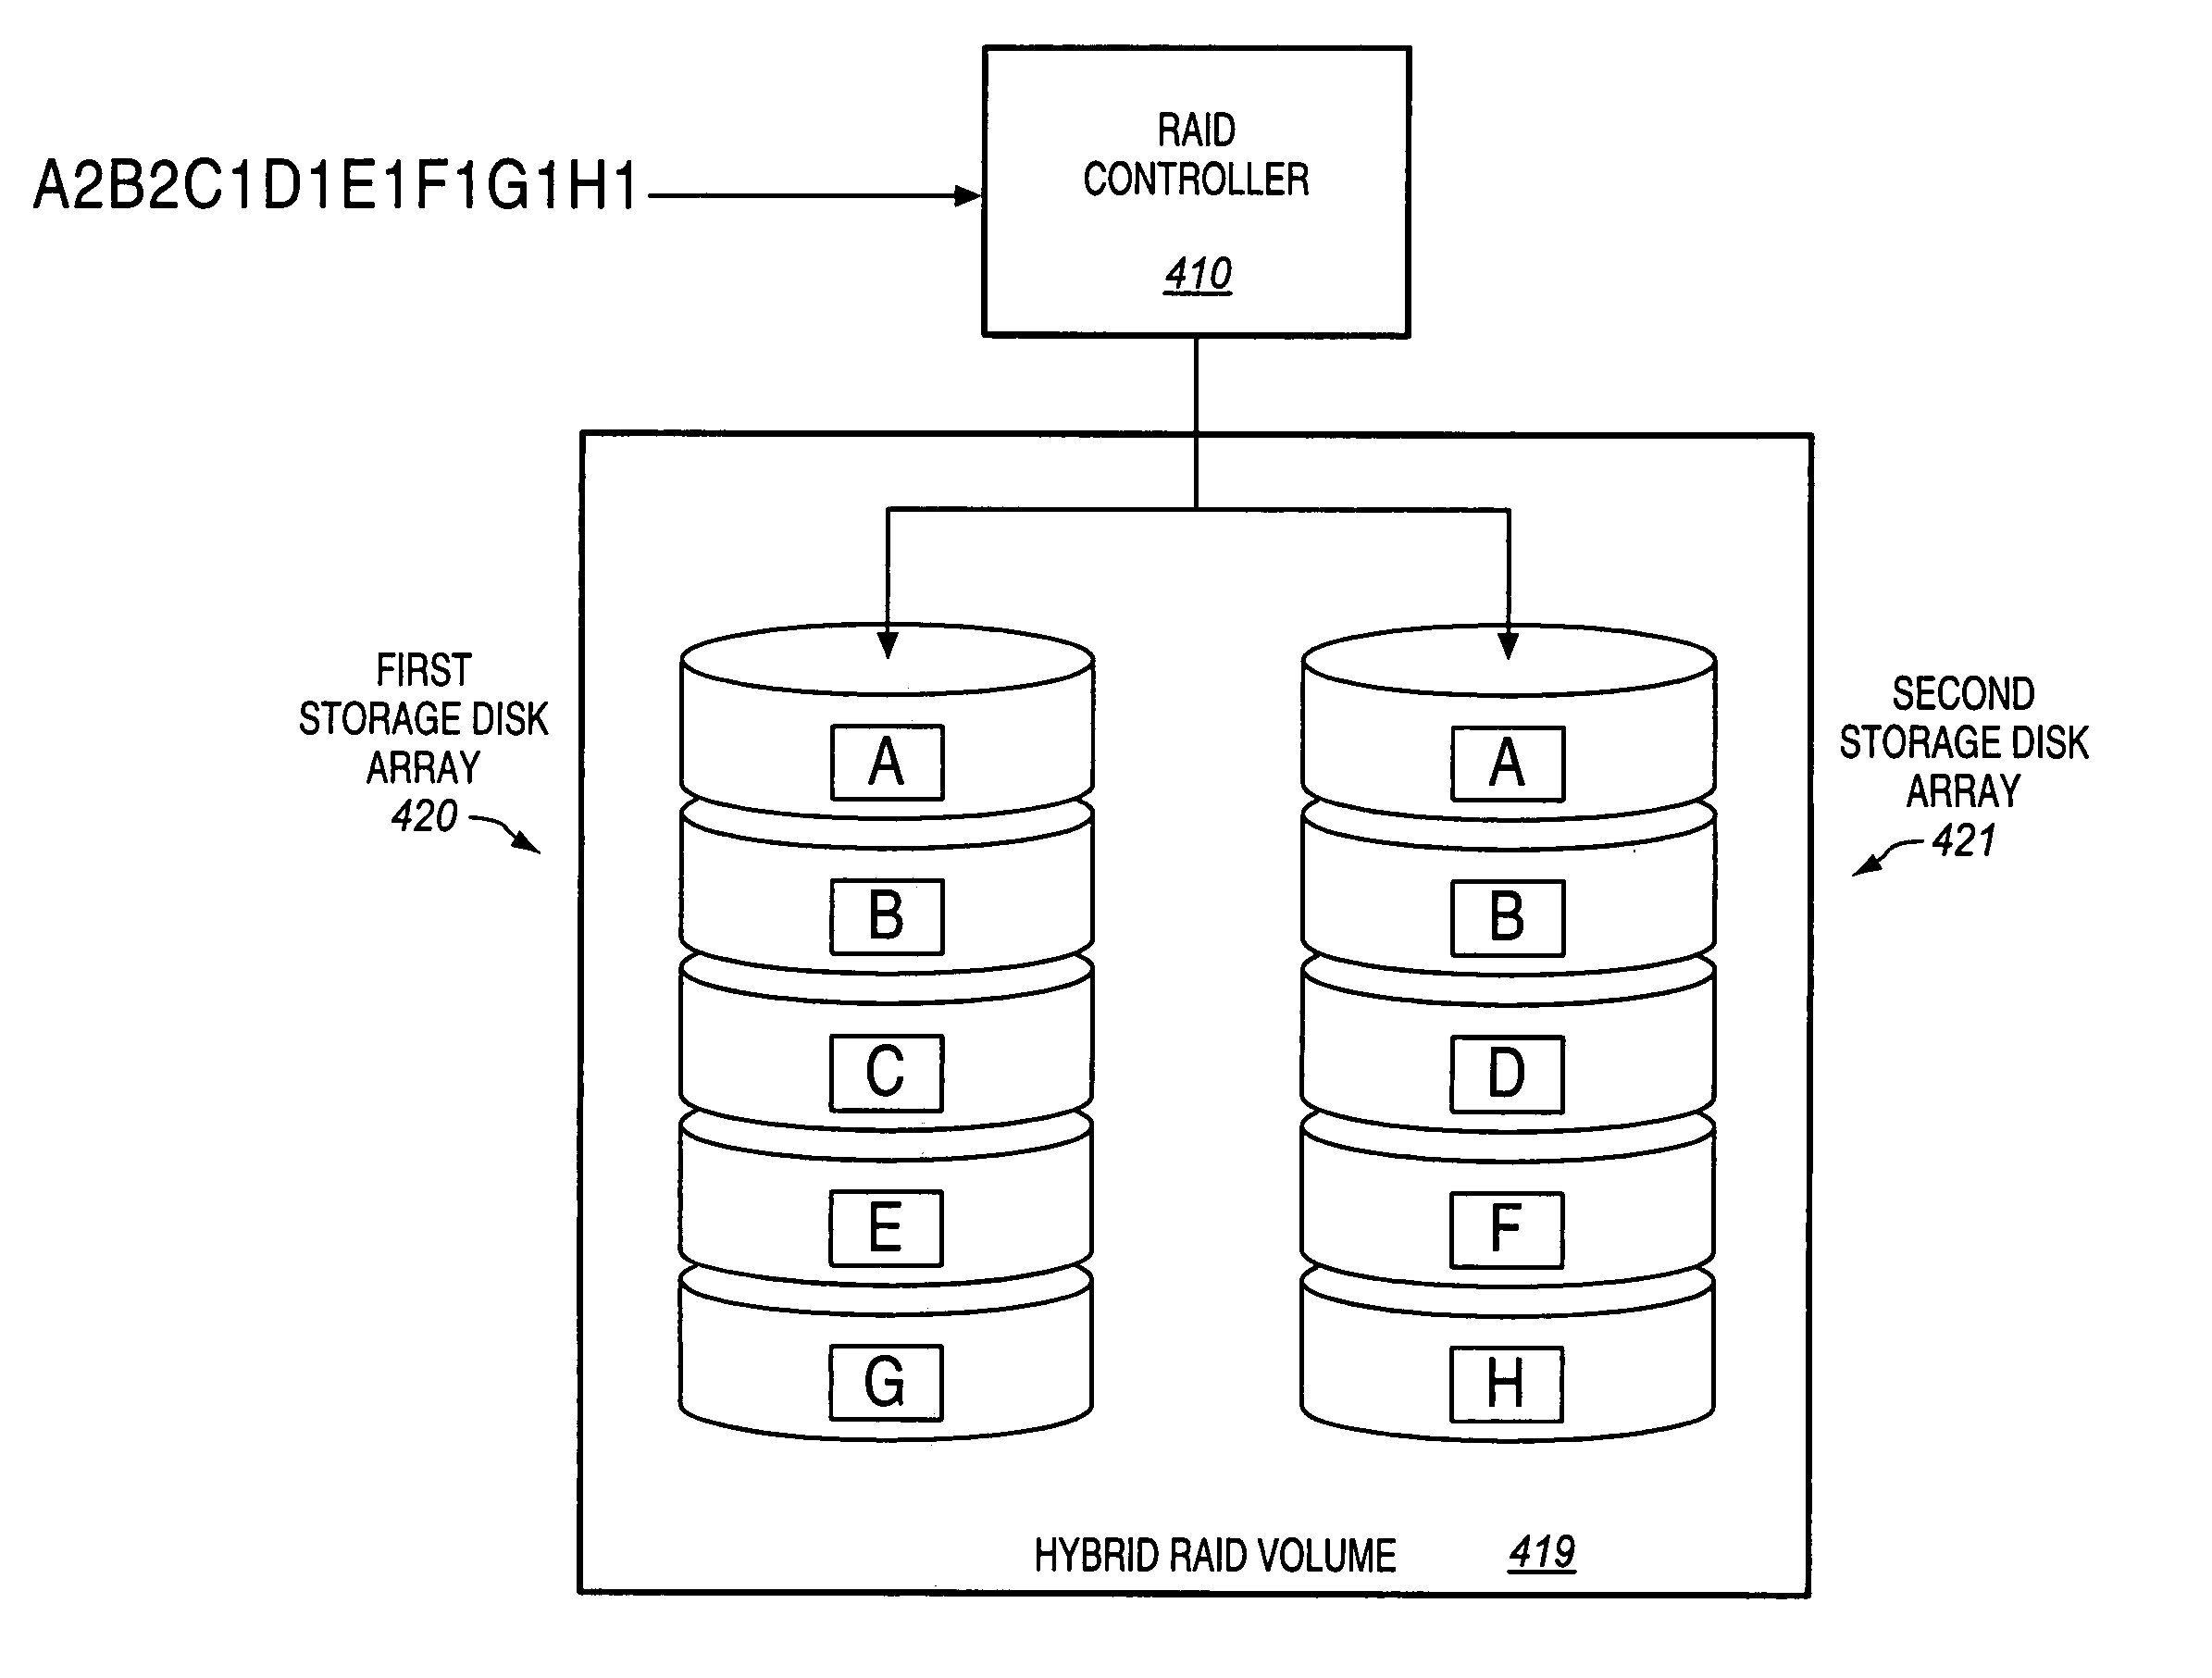 Storing data with different specified levels of data redundancy